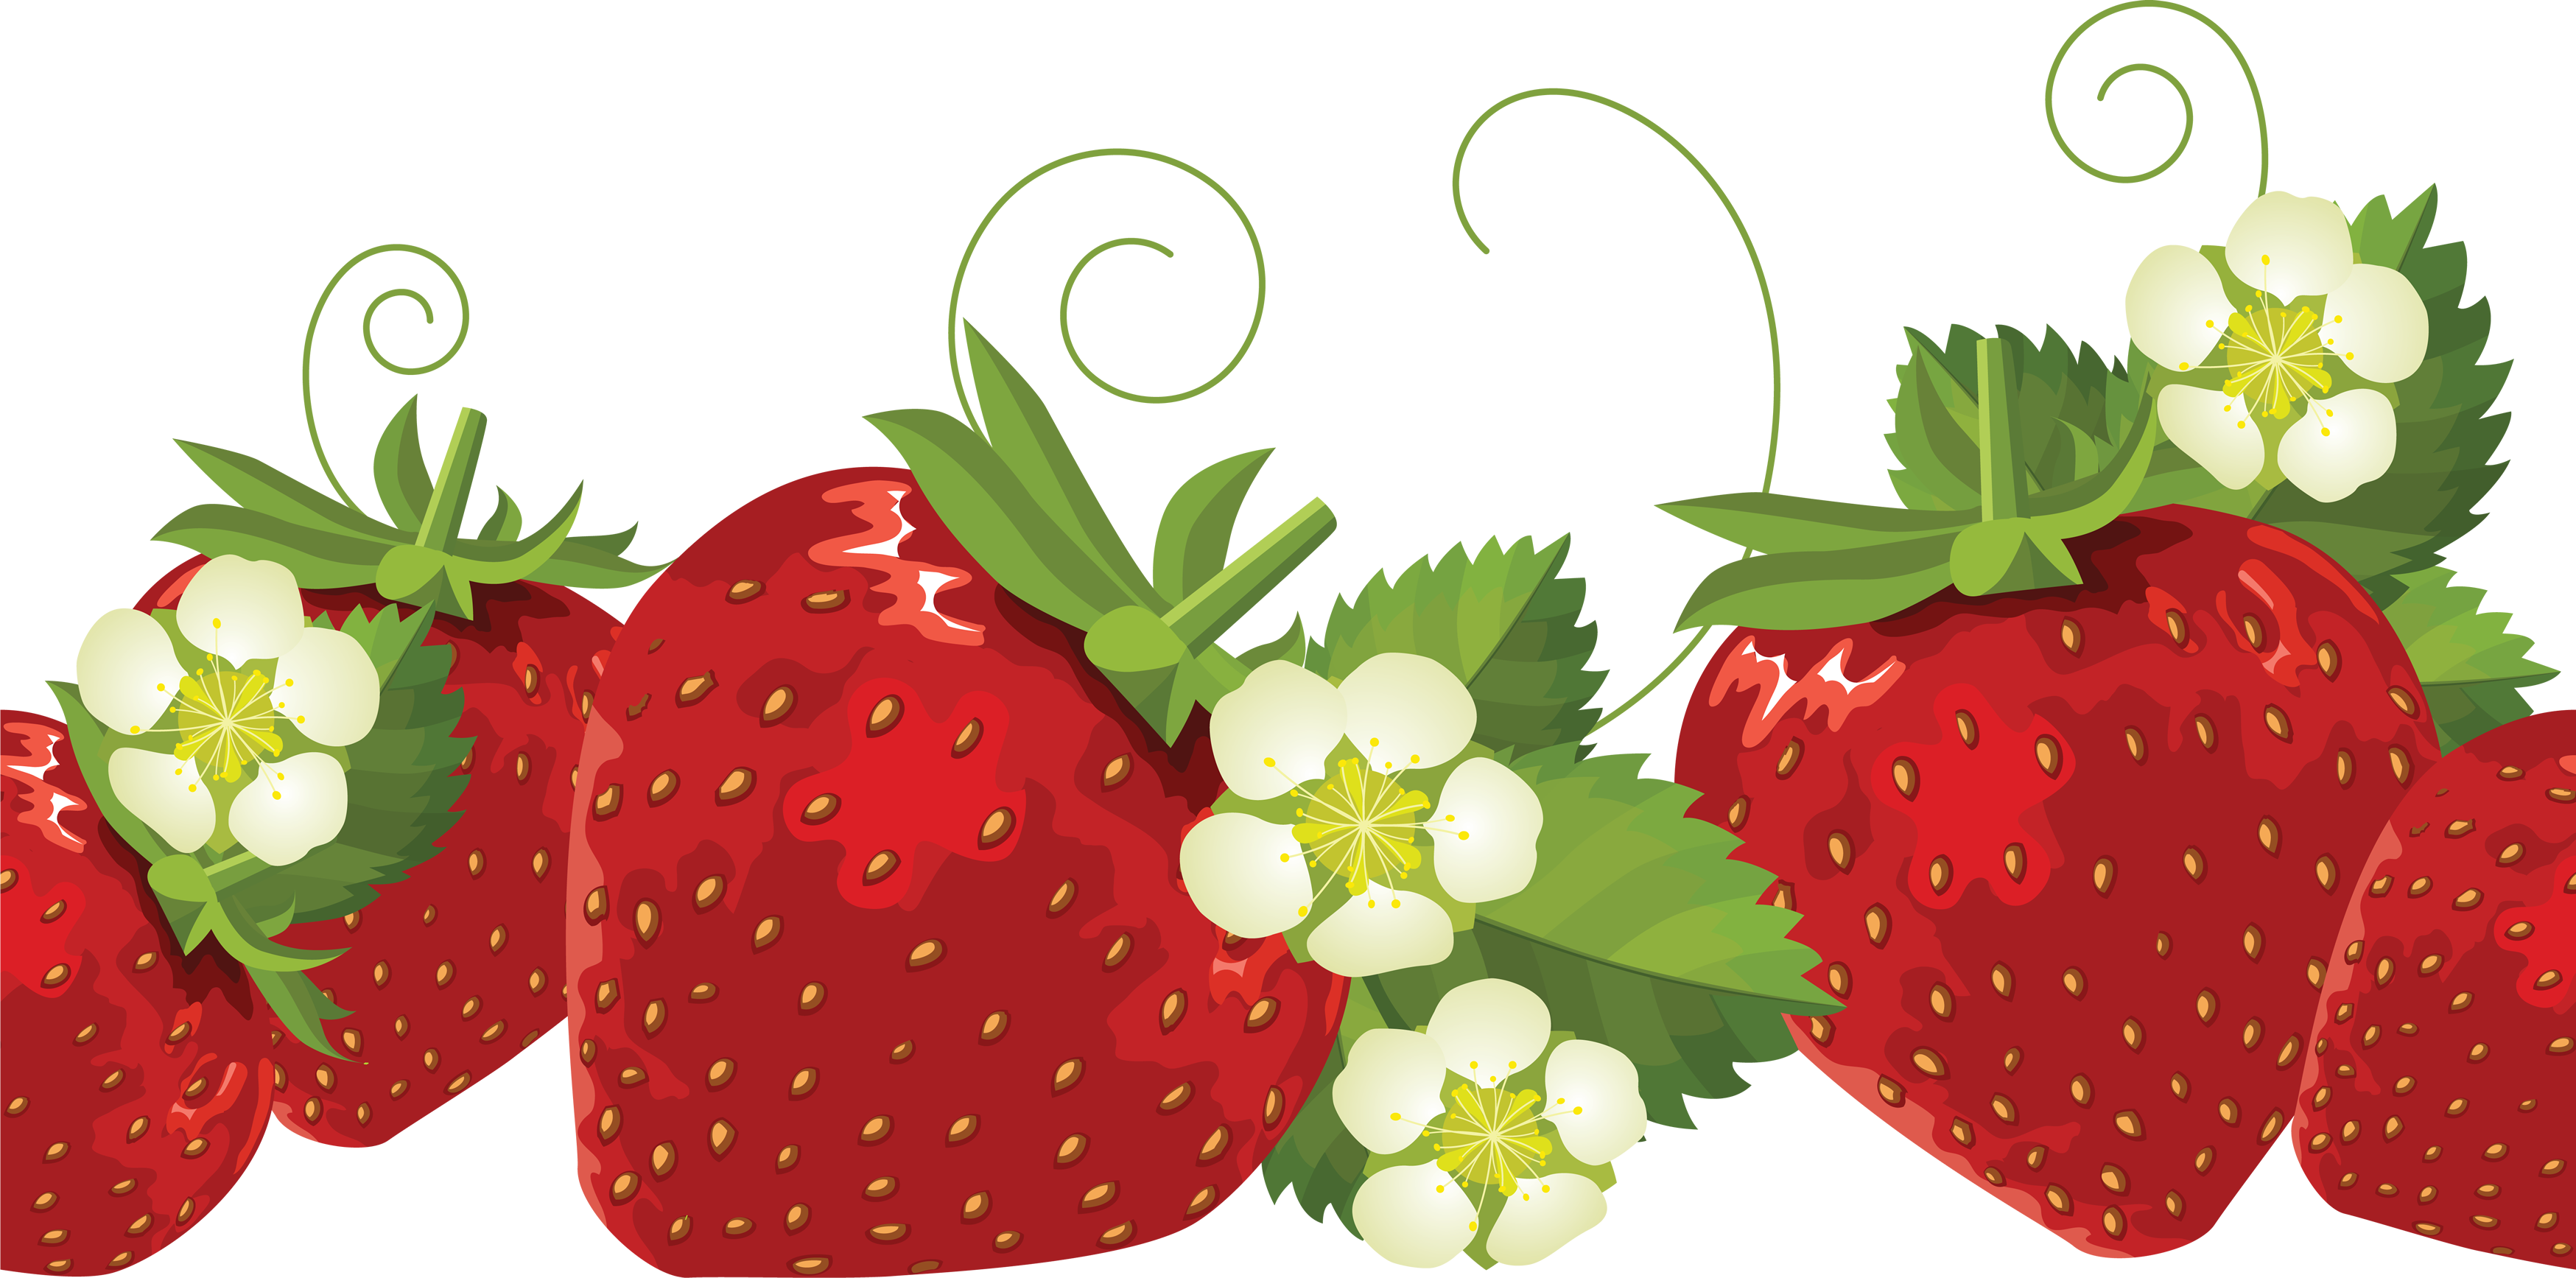 Thirty five isolated stock. Watermelon clipart strawberry